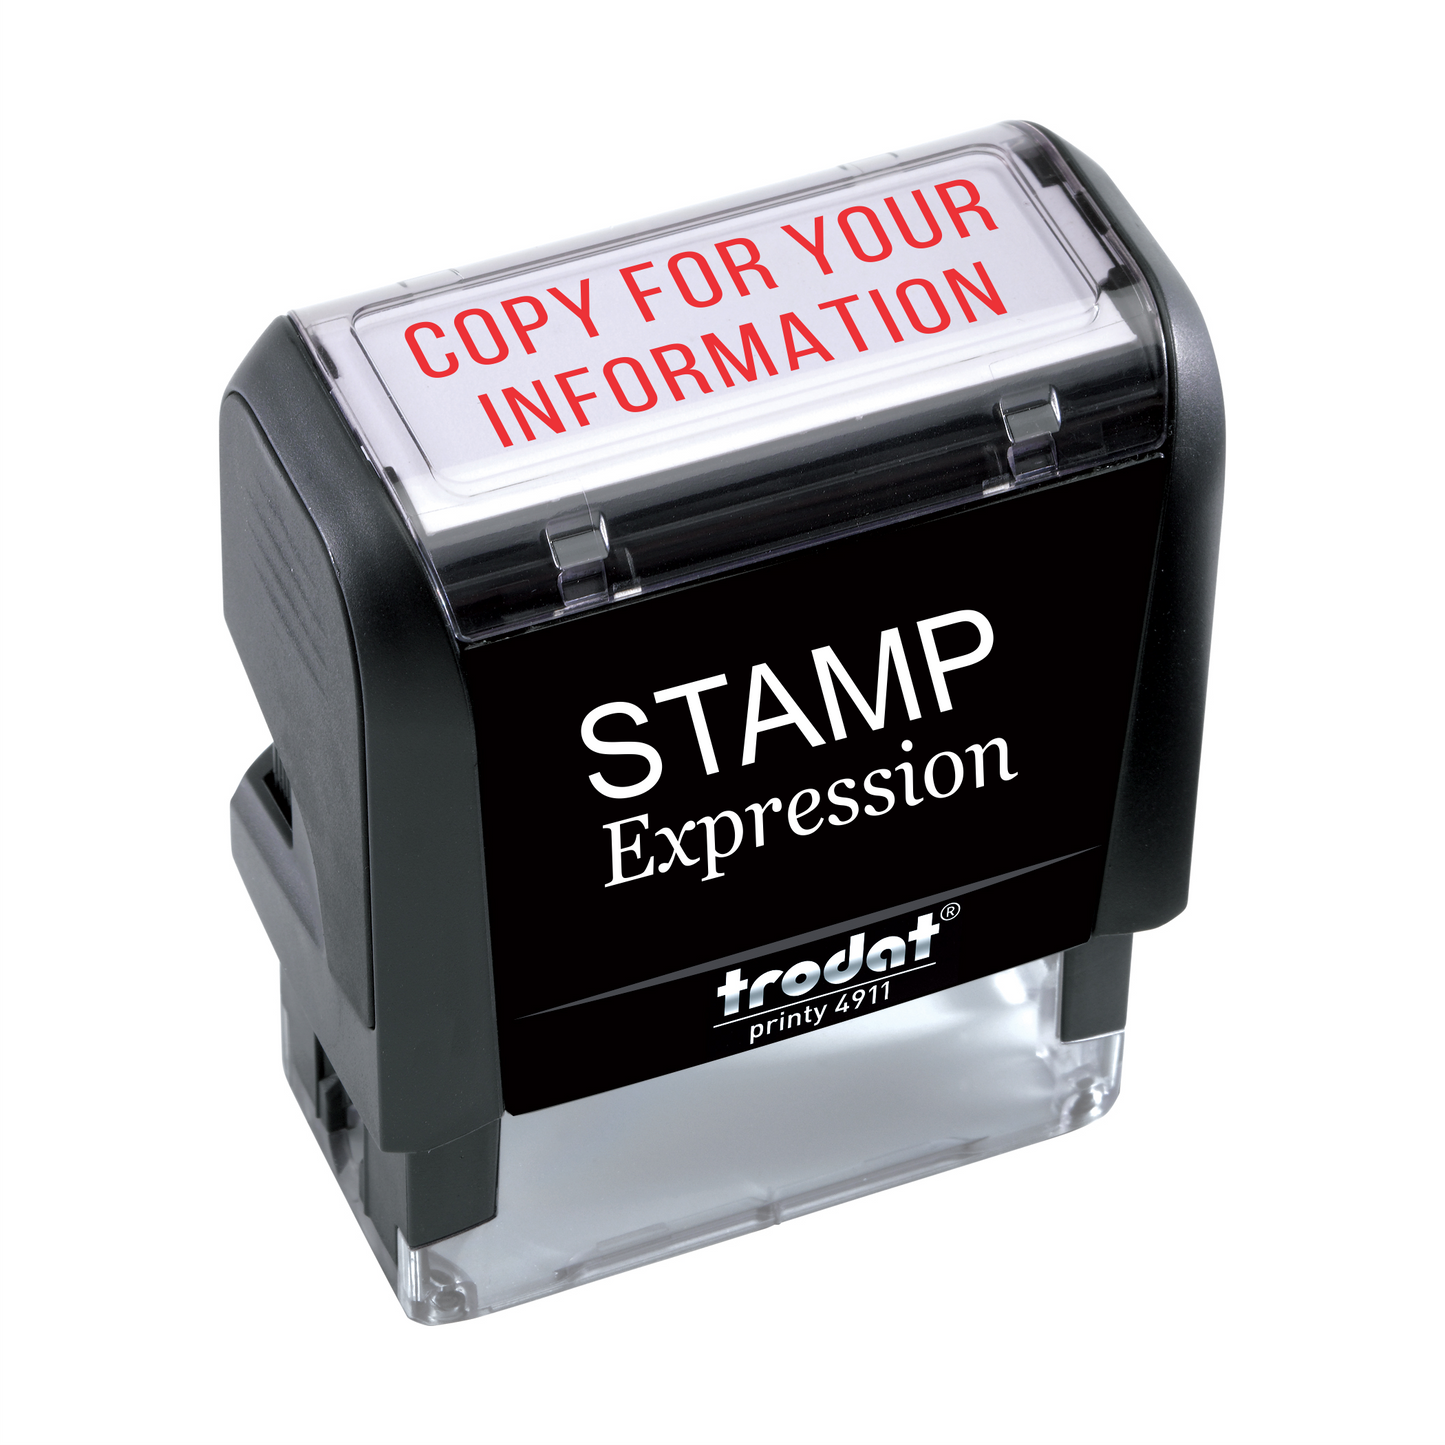 Copy for Your Information Office Self Inking Rubber Stamp (SH-5243)